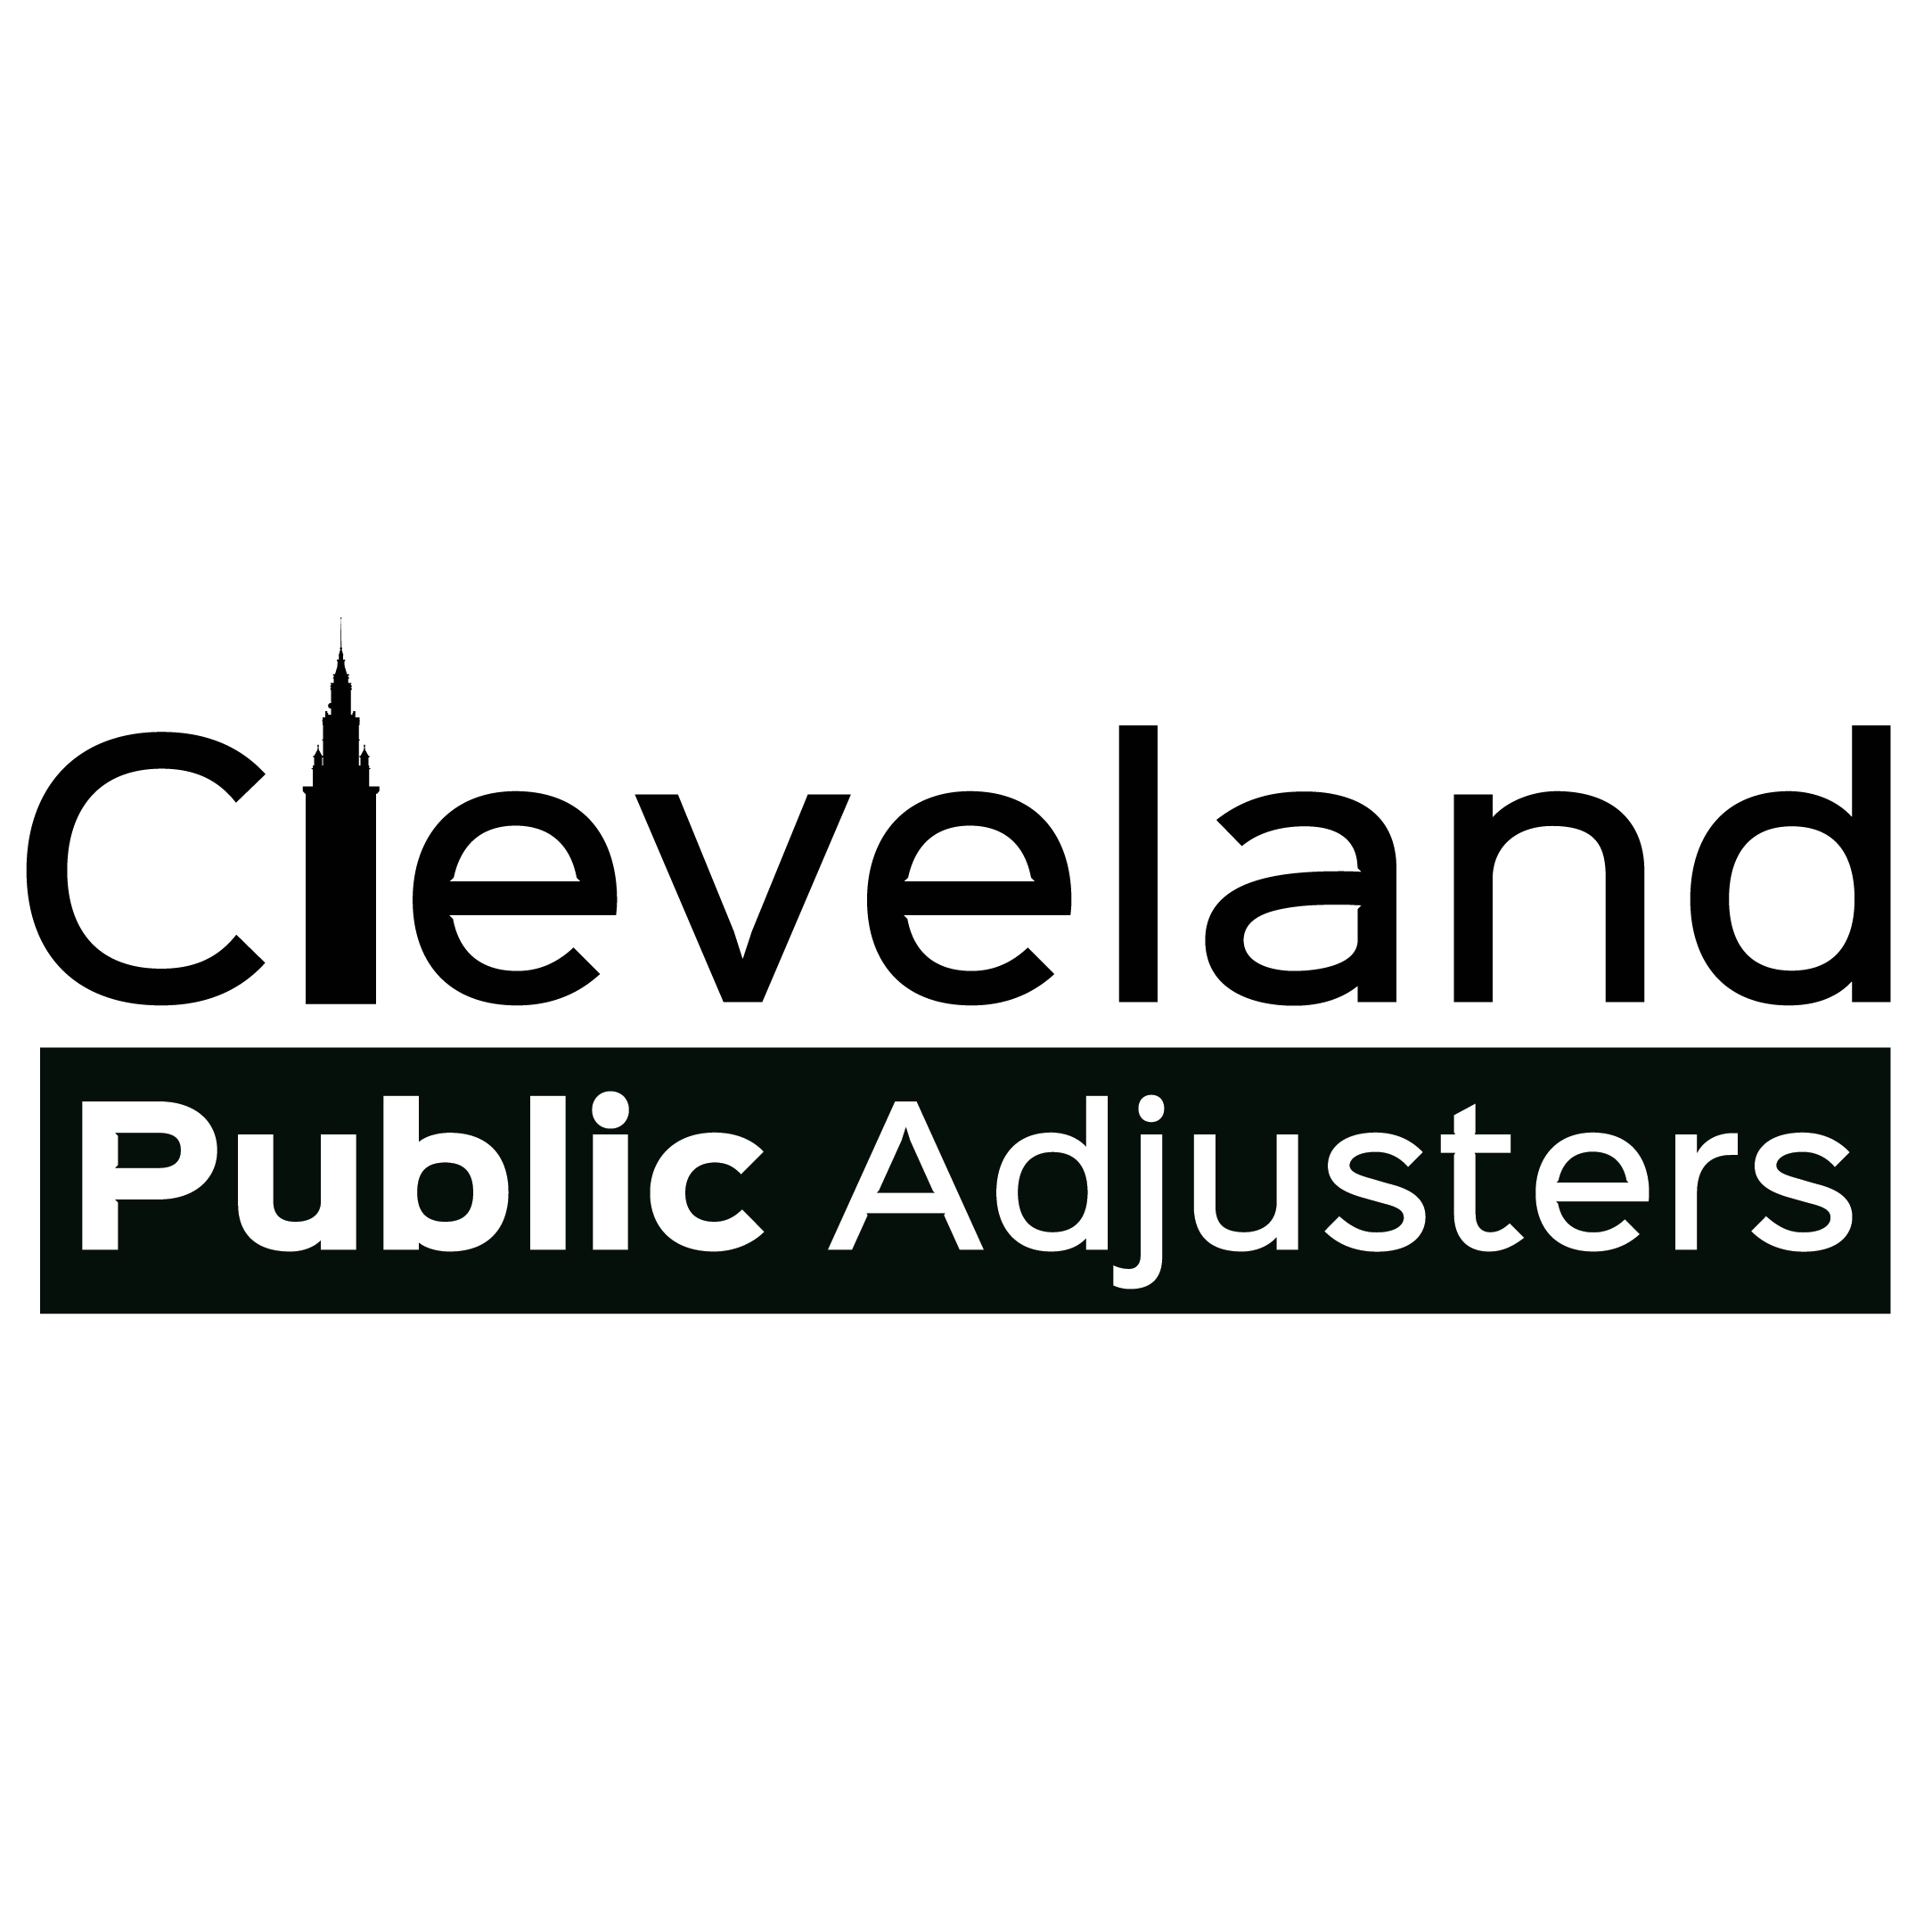 Cleveland Public Adjusters - Lakewood, OH - (216)633-9843 | ShowMeLocal.com